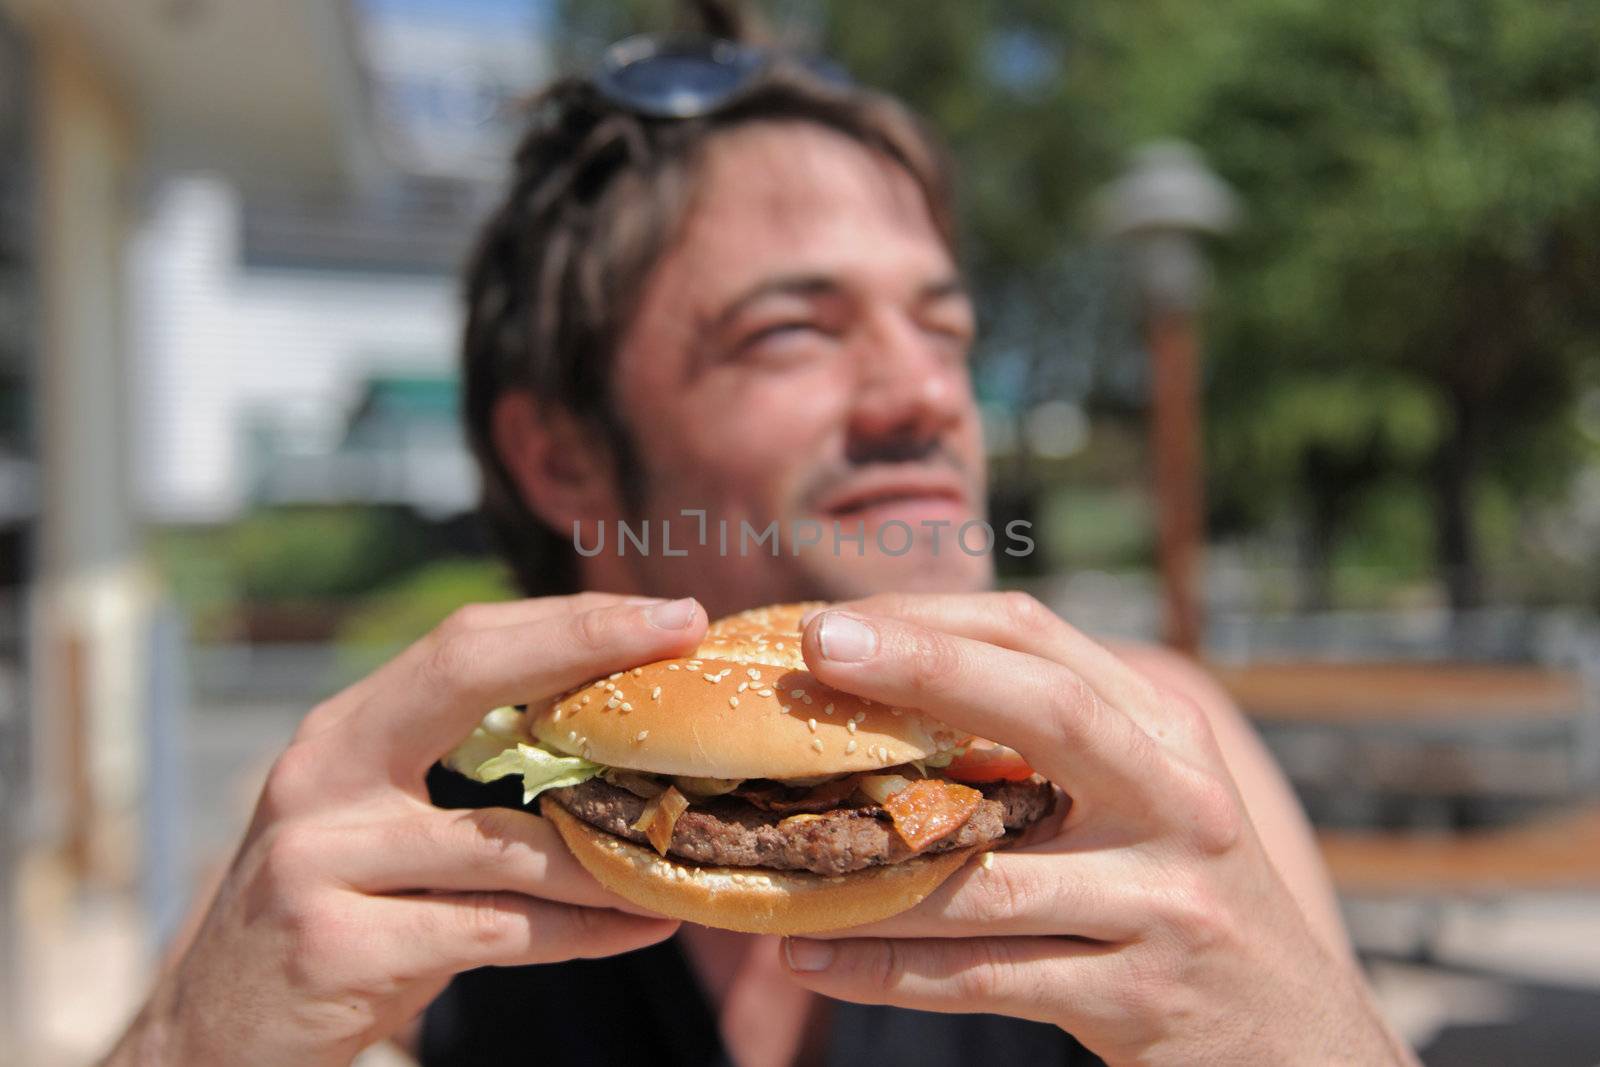 a man eating a hamburger in a fastfood, focus on the sandwitch